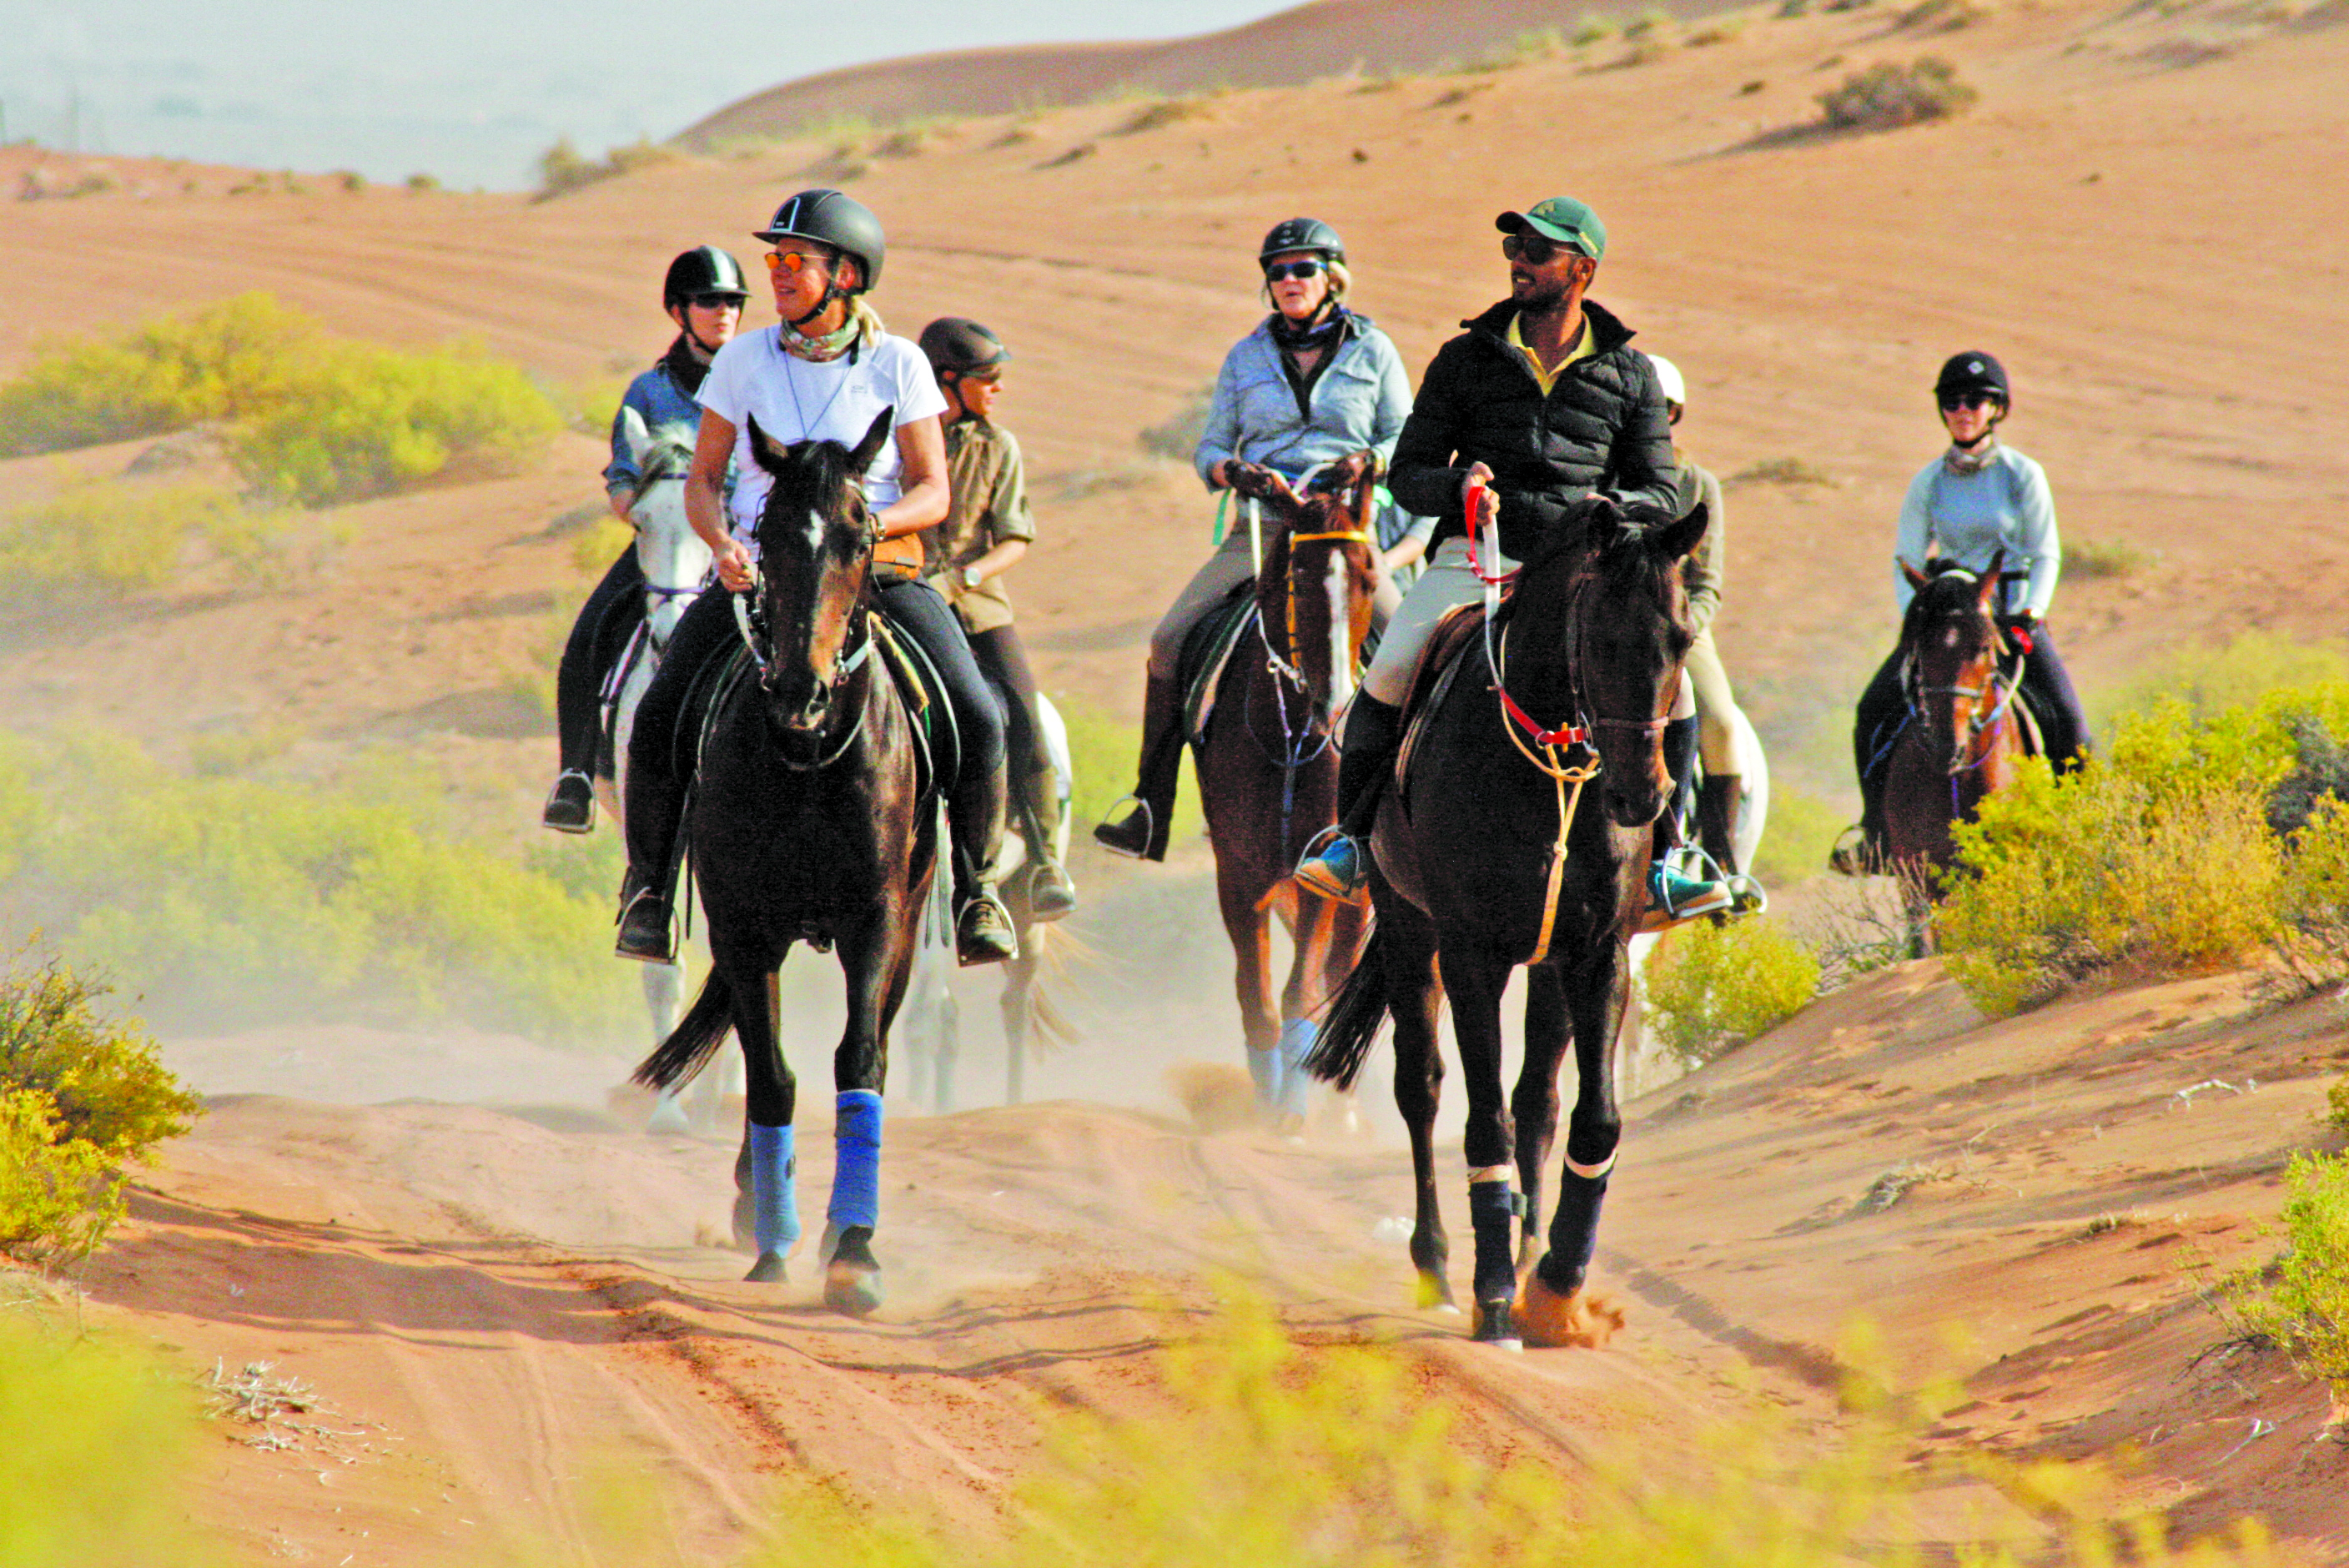 Oman beckons for the horse and the rider